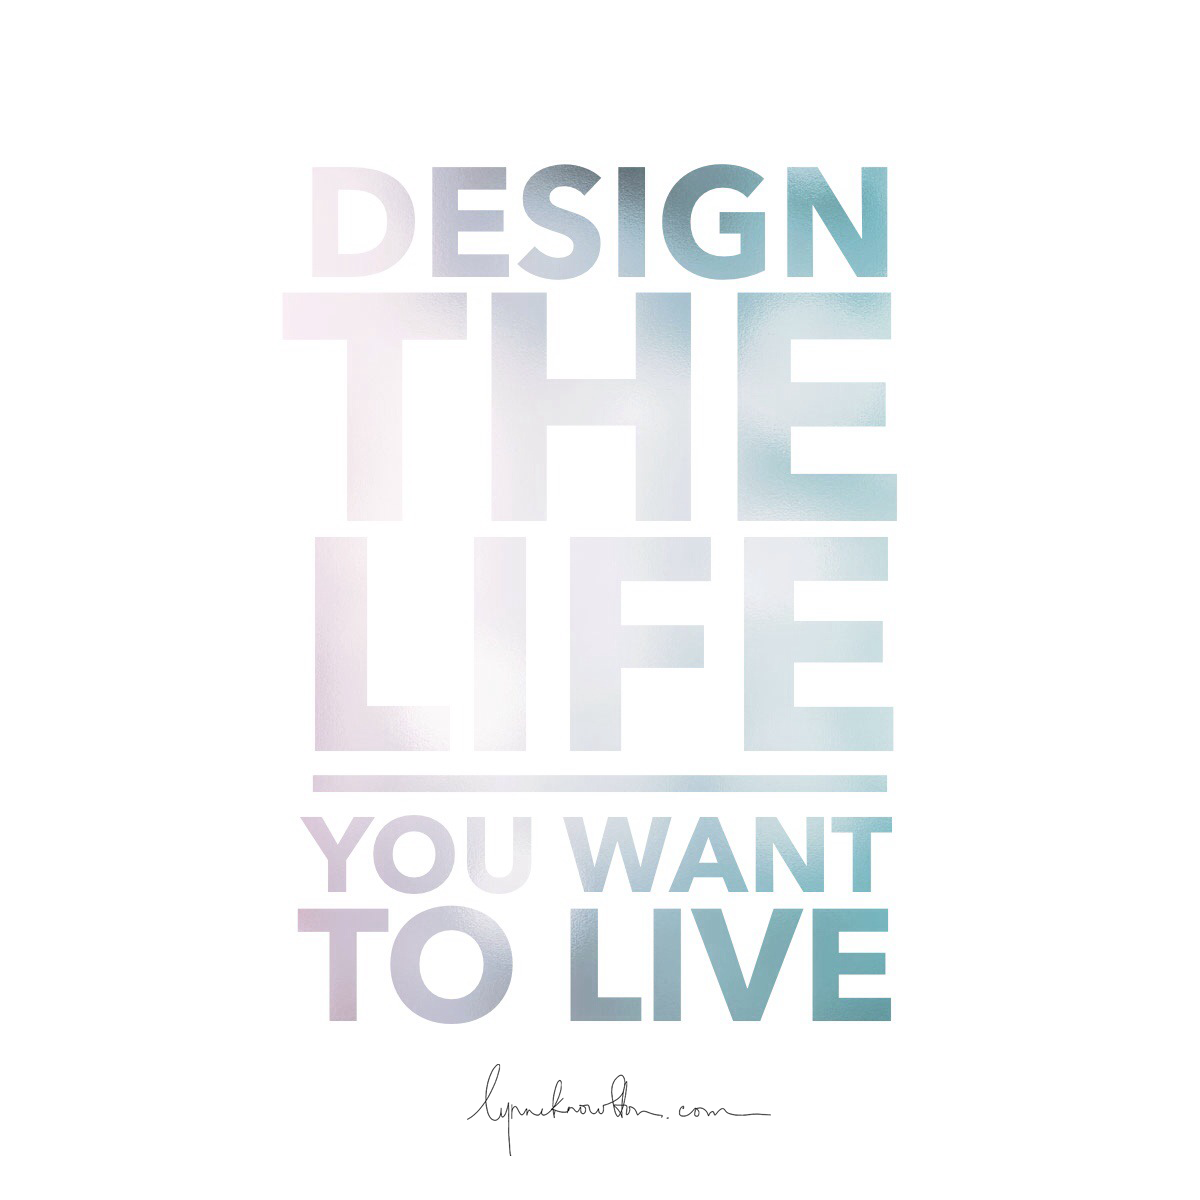 Design The Life You Want To Live https://lynneknowlton.com/wordswag/ ‎@lynneknowlton #WordSwagApp